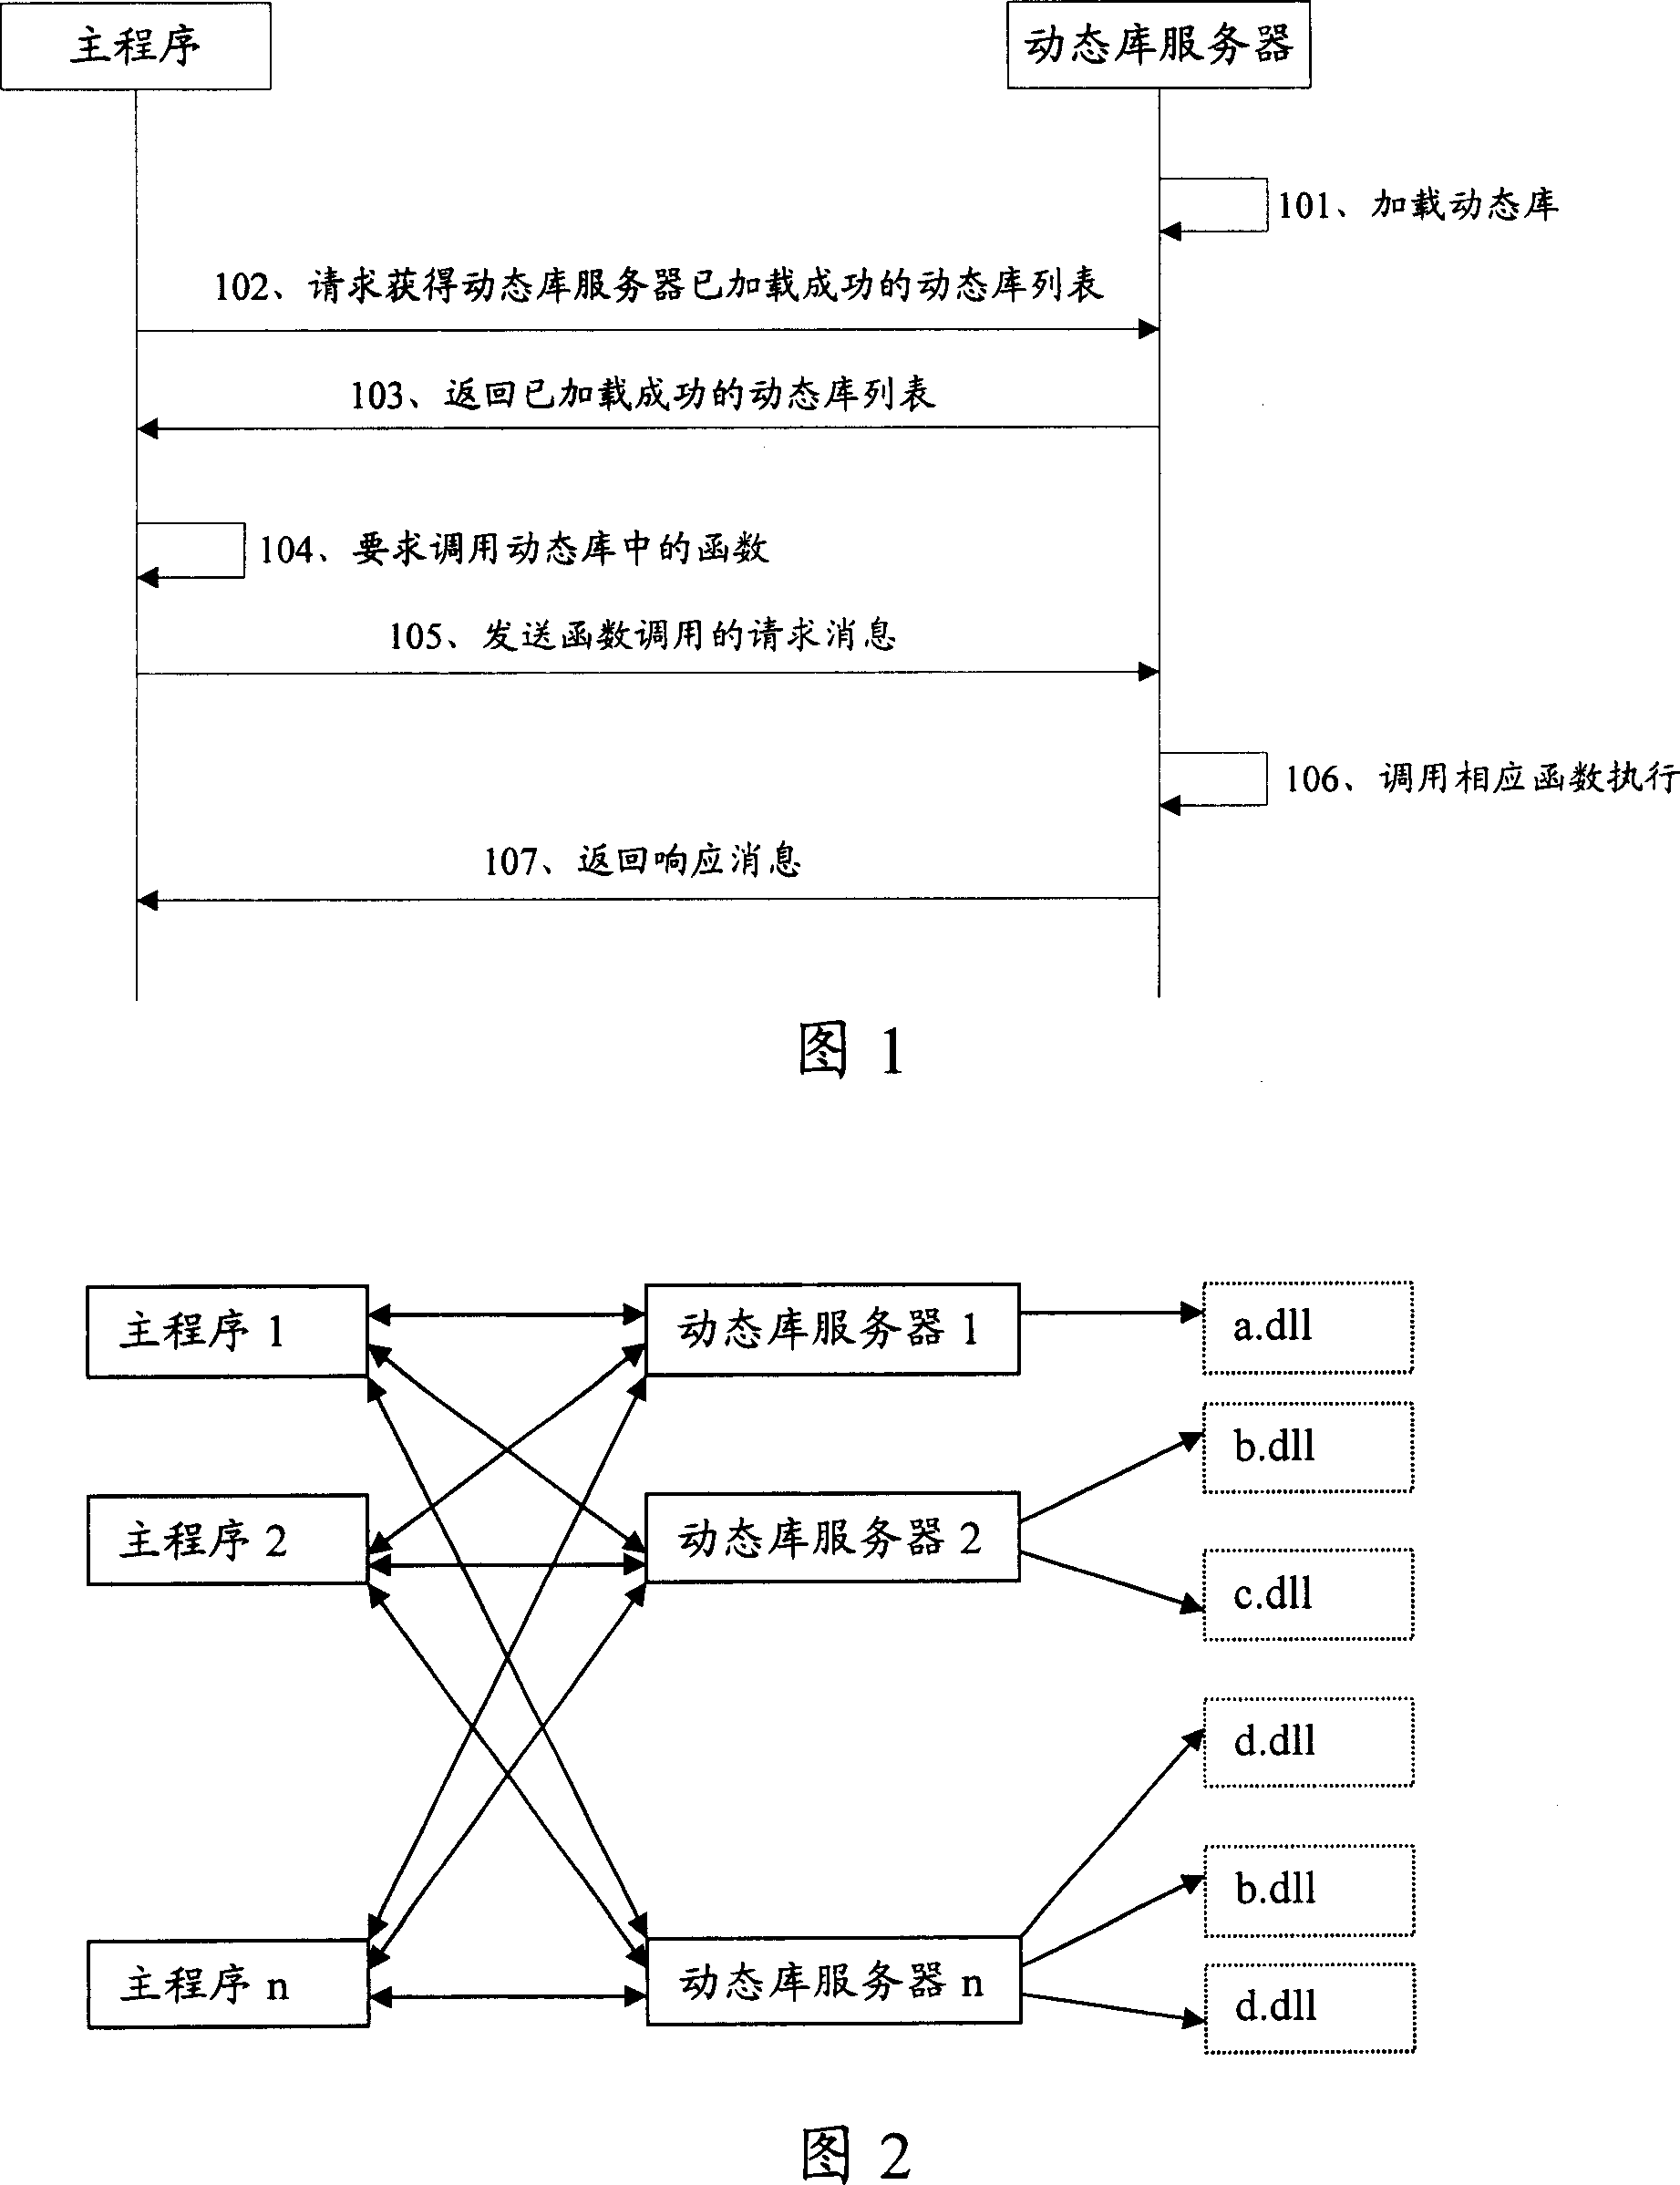 Method and apparatus for calling dynamic library and dynamic library server